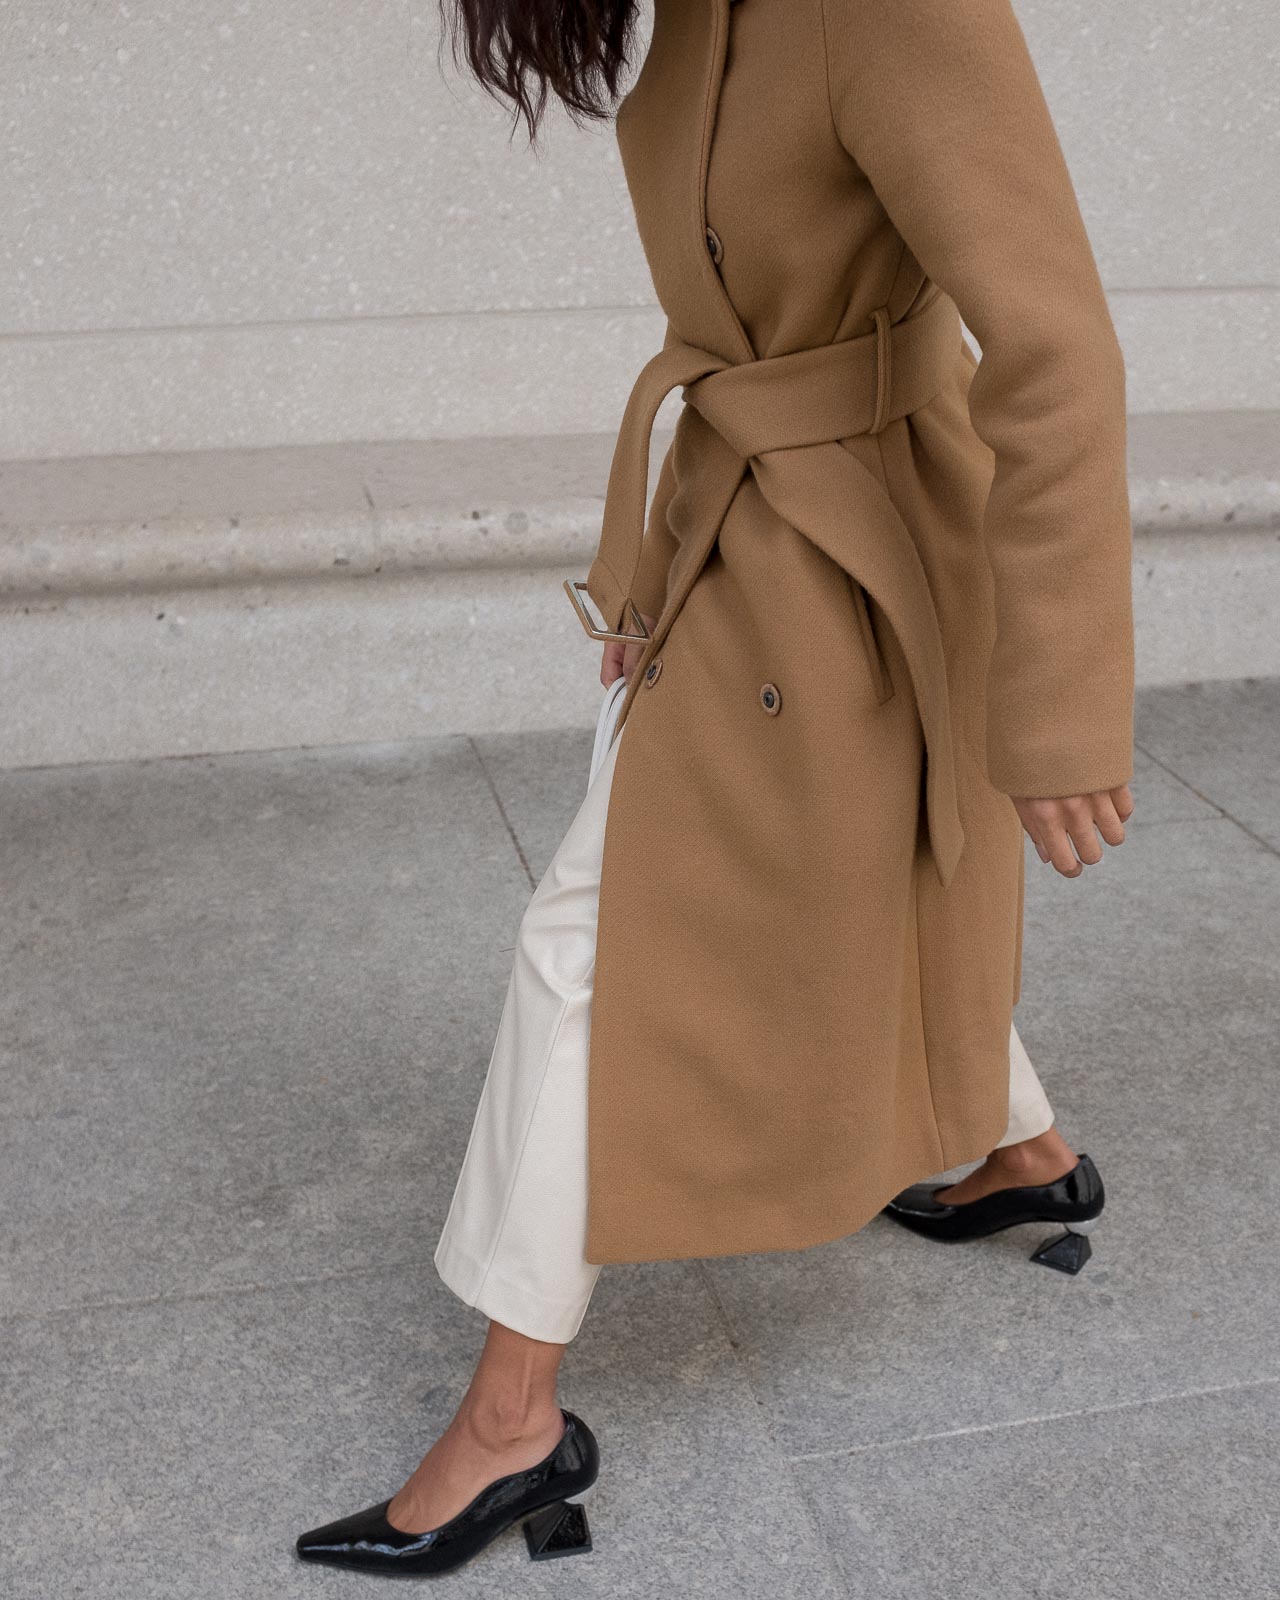 storm wears weekday creme pants combined with yuul yie black mules and by malene birger camel coat